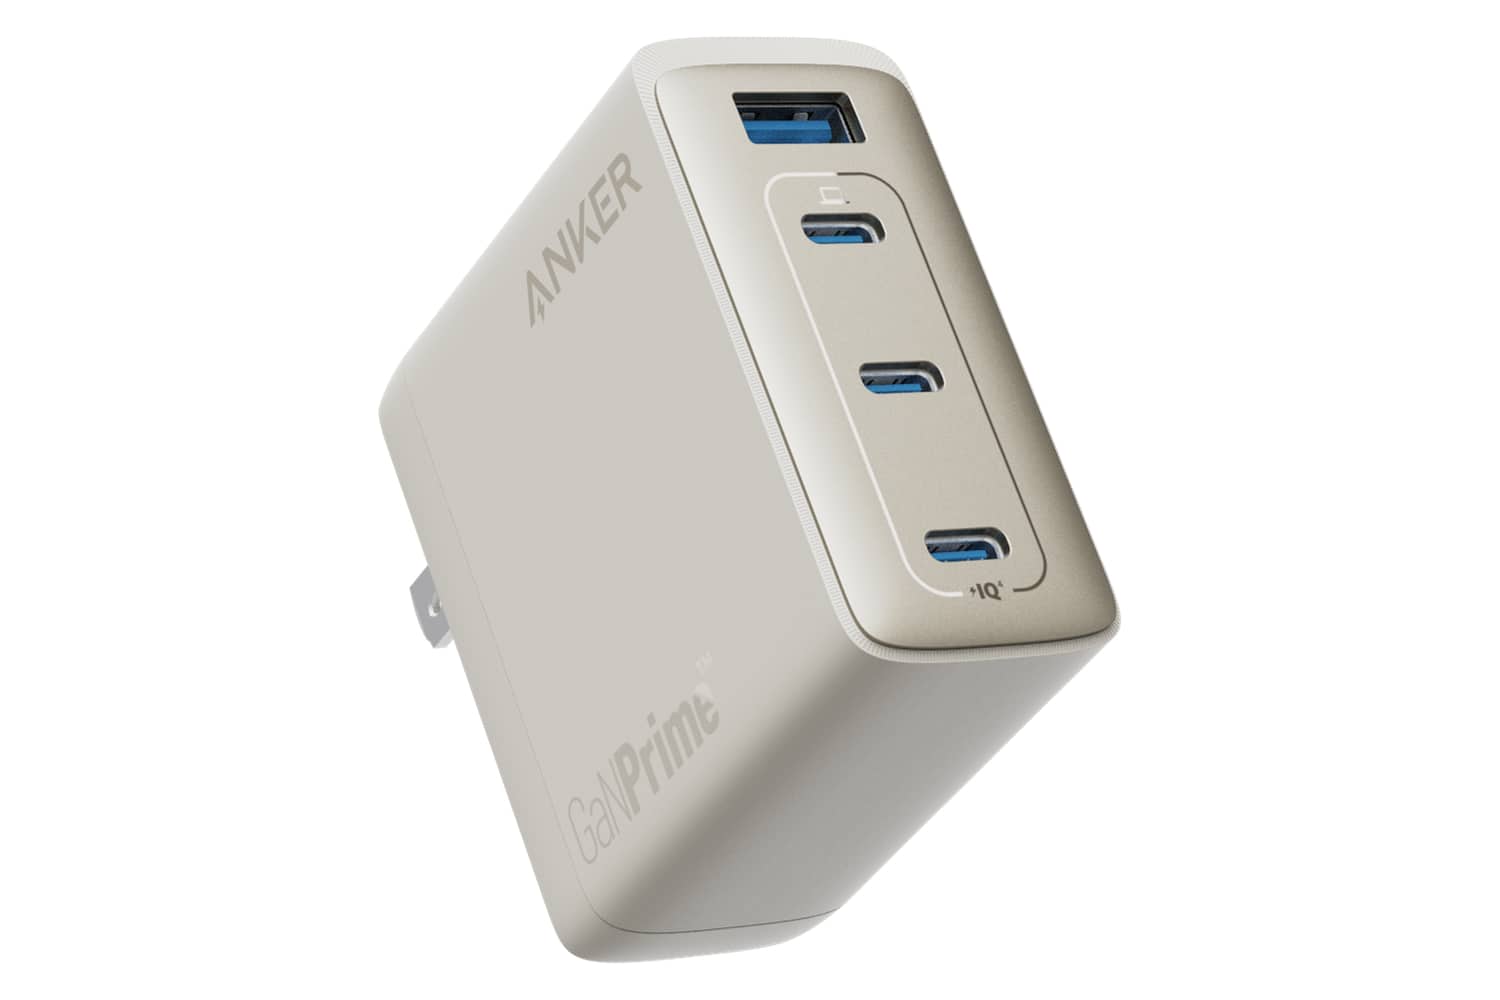 Upgrading my travel kit with the Anker Prime 100W GaN charger